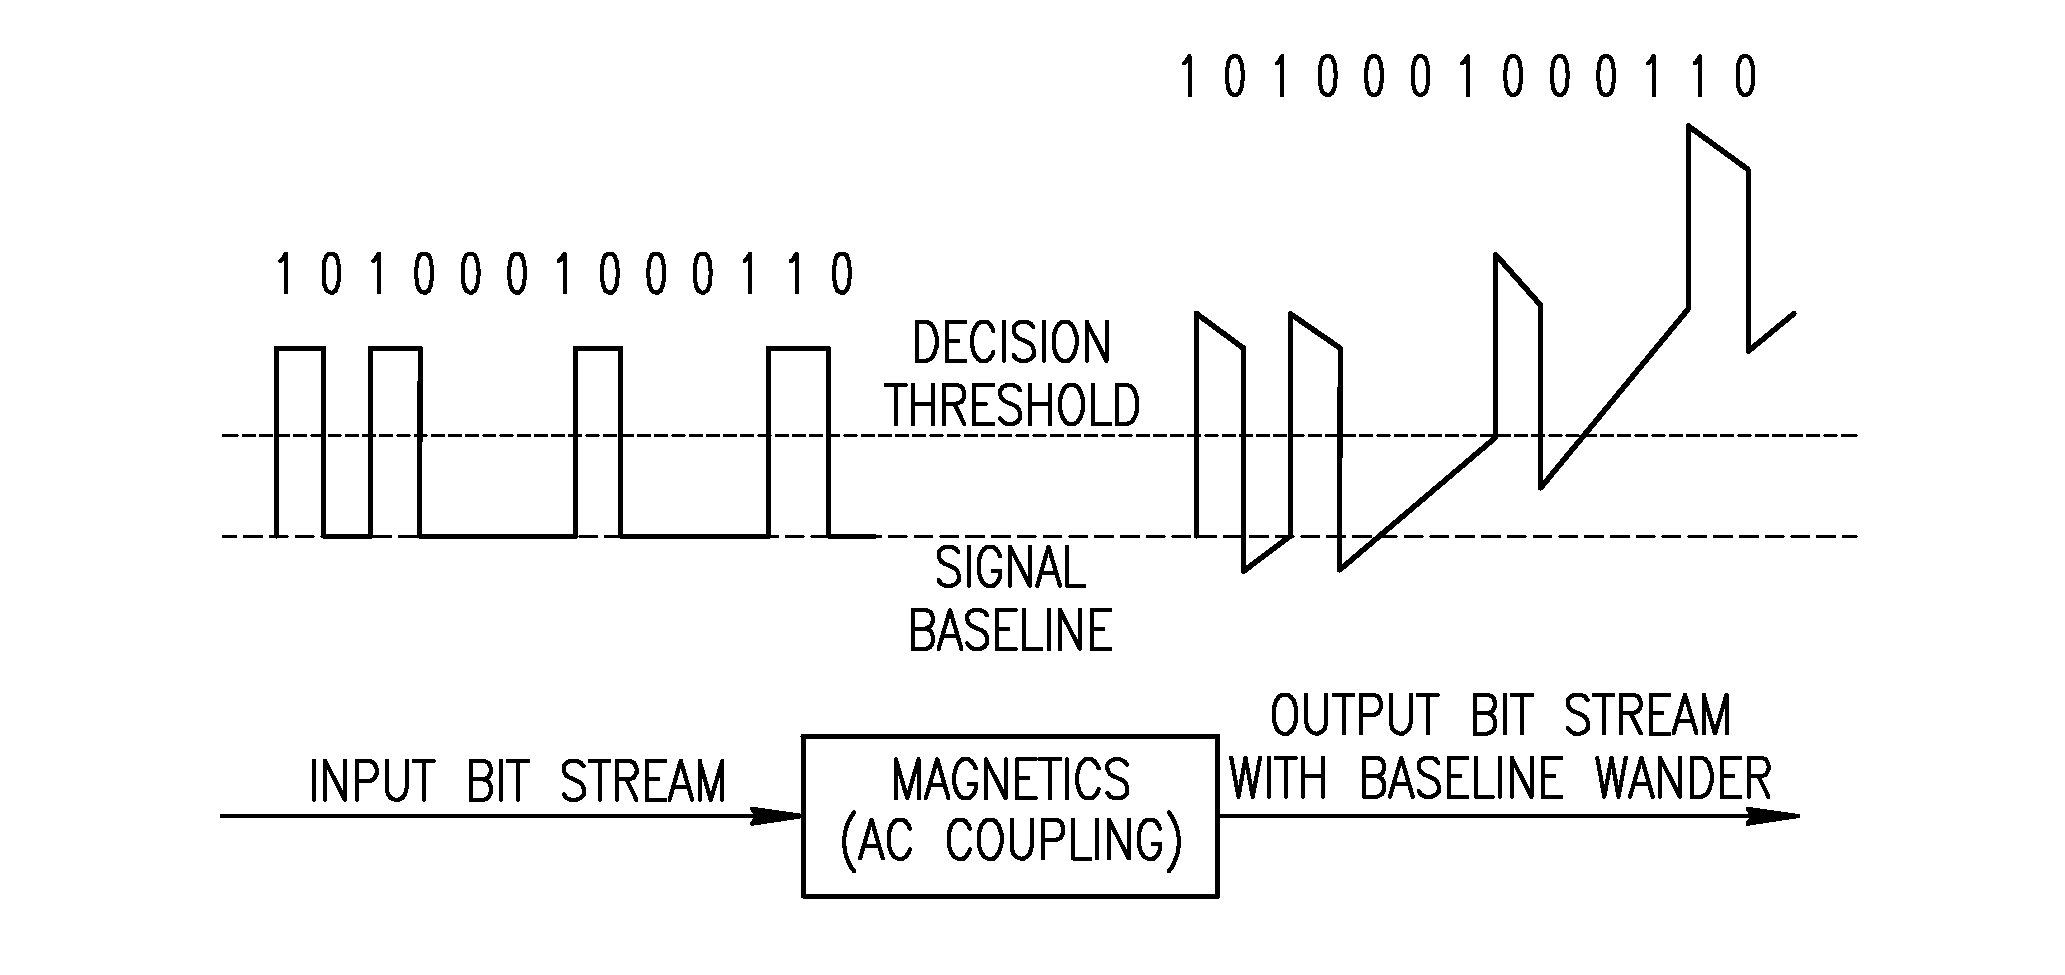 Apparatus for and method of baseline wander mitigation in communication networks